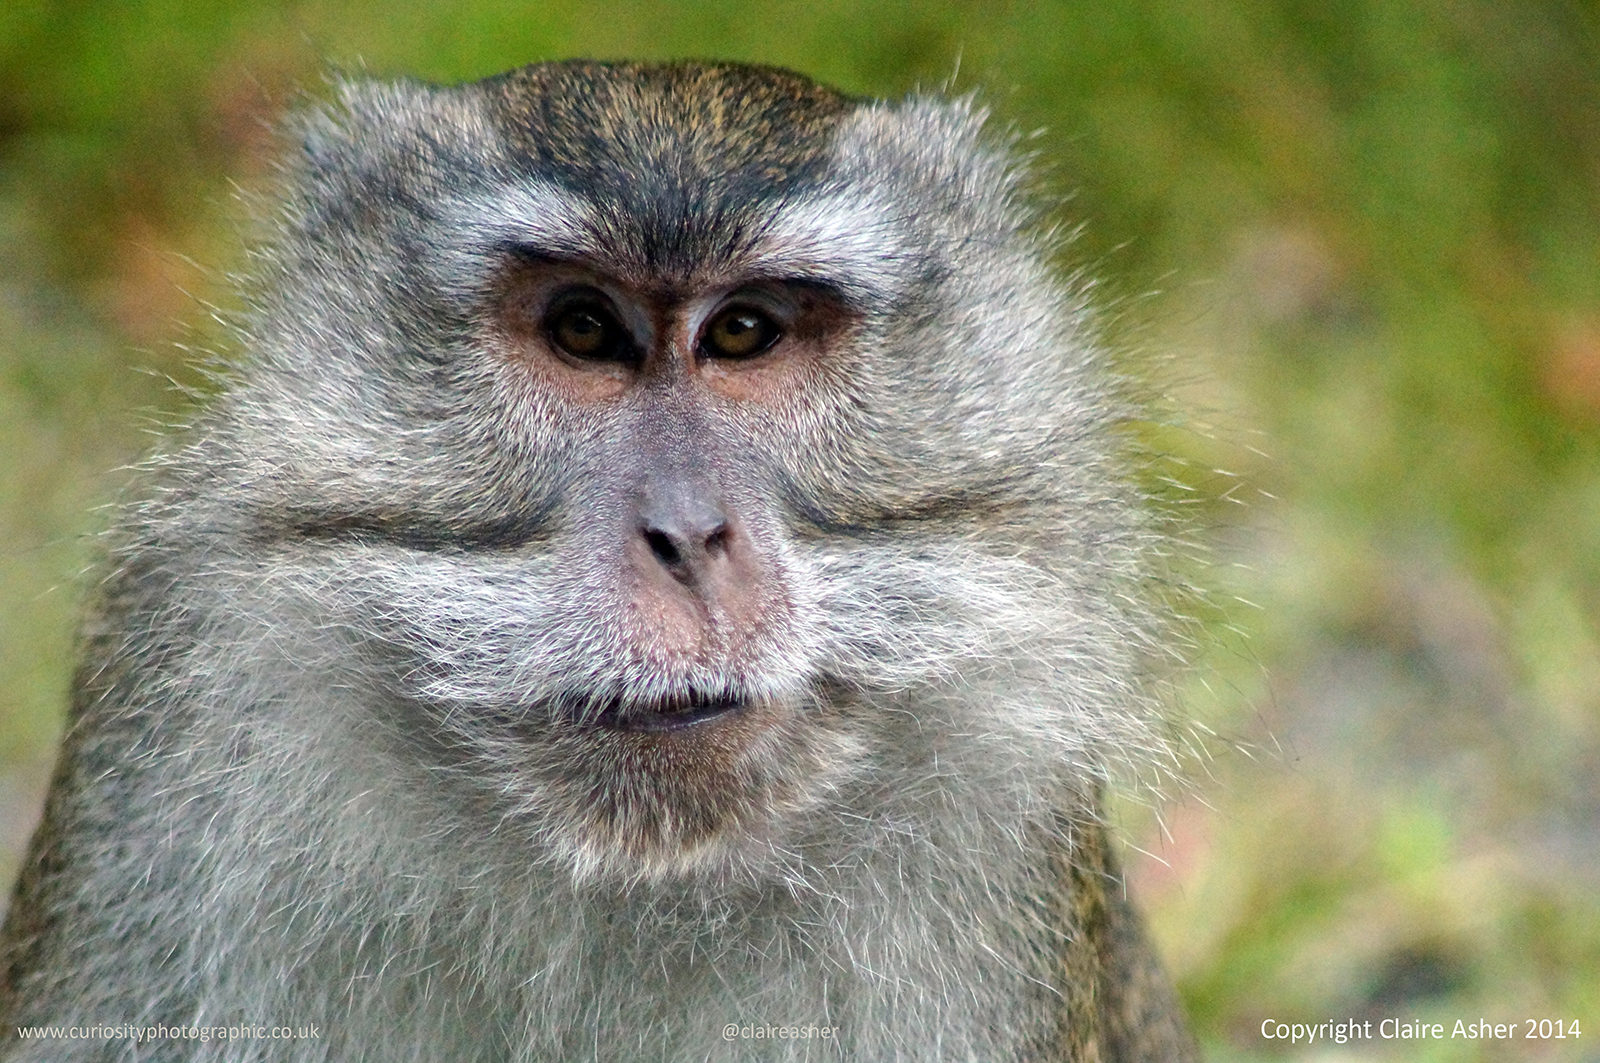 A Long-tailed Macaque (Macaca fascicularis), photographed in Flores, Indonesia in 2014.